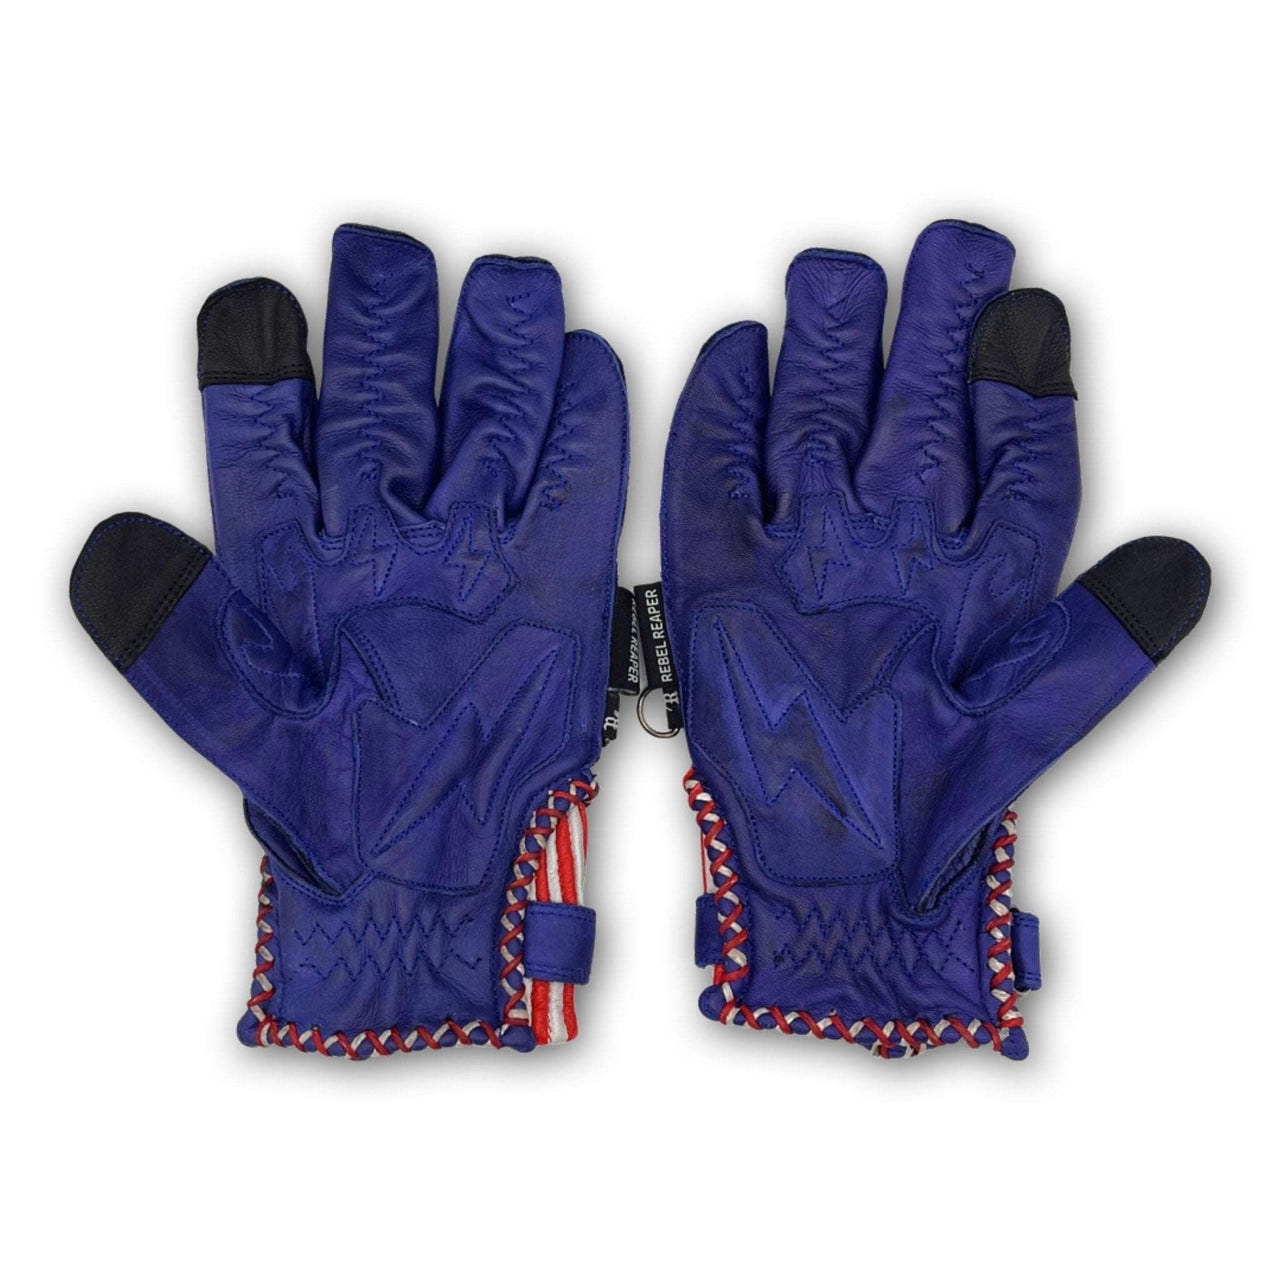 Leather Motorcycle Riding Gloves - Modern Roper - Red | White | Blue | USA